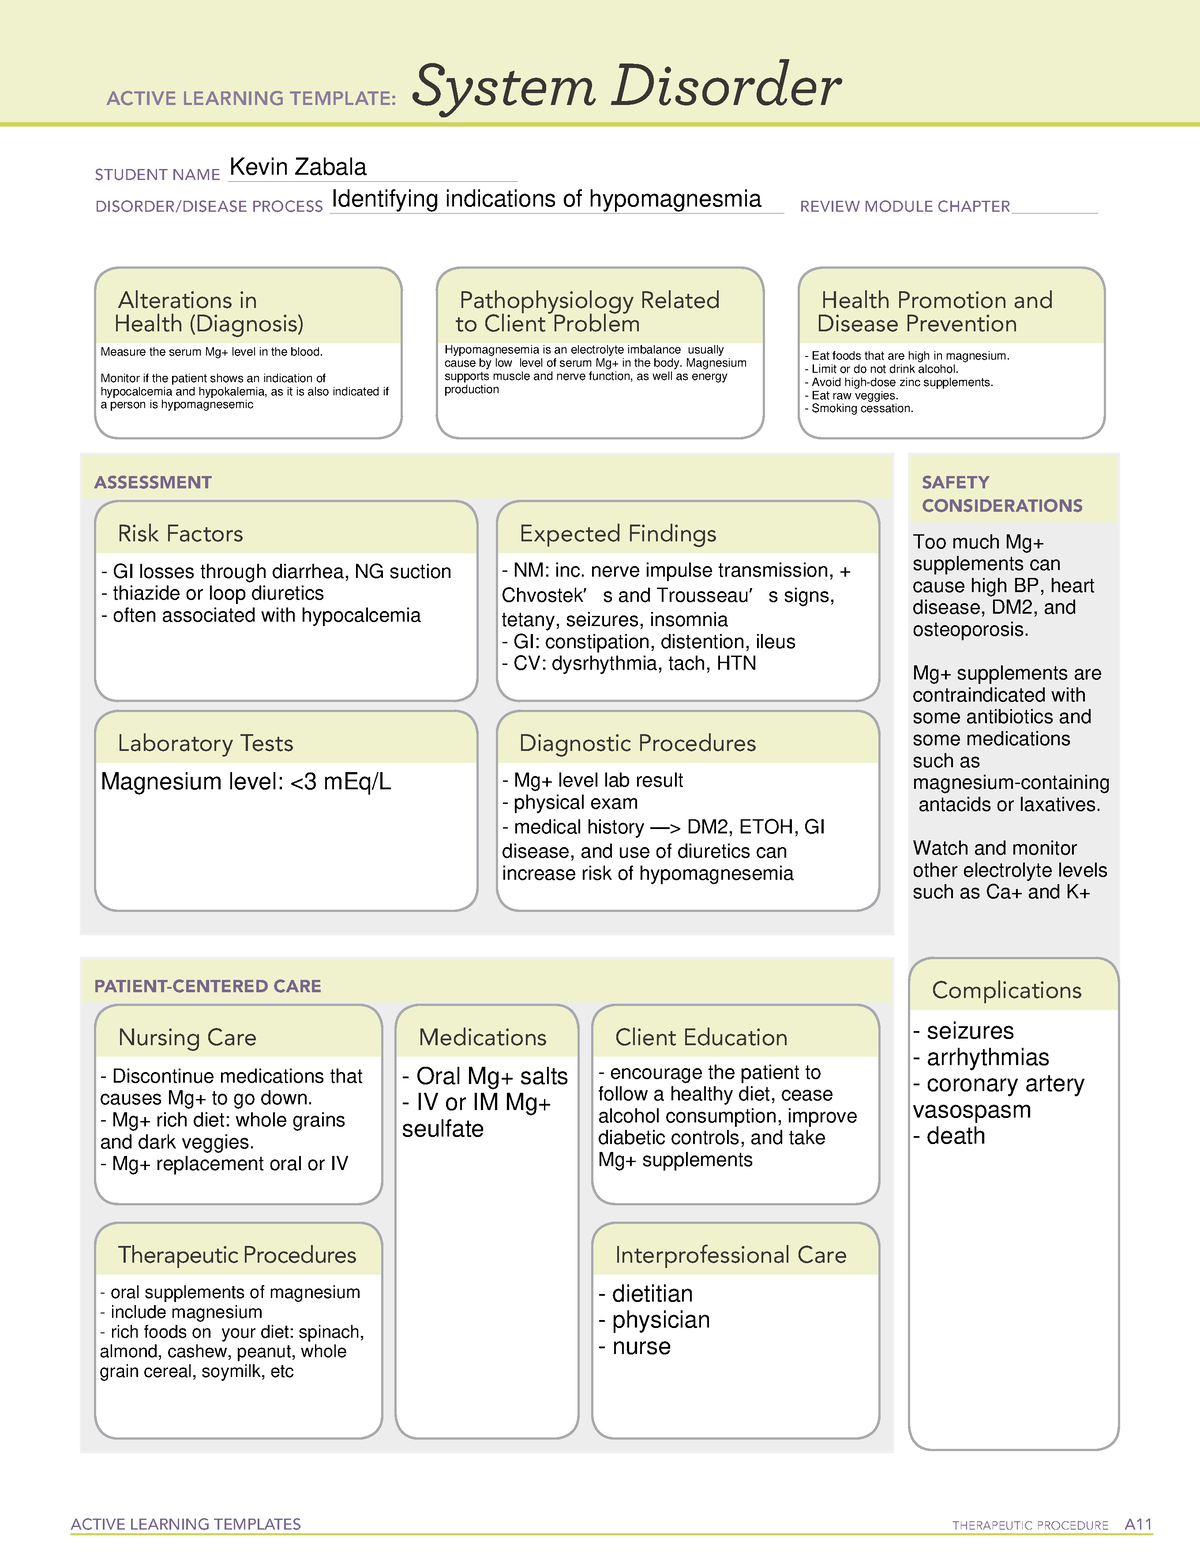 Hypomagnesemia System Disorder - ACTIVE LEARNING TEMPLATES THERAPEUTIC ...